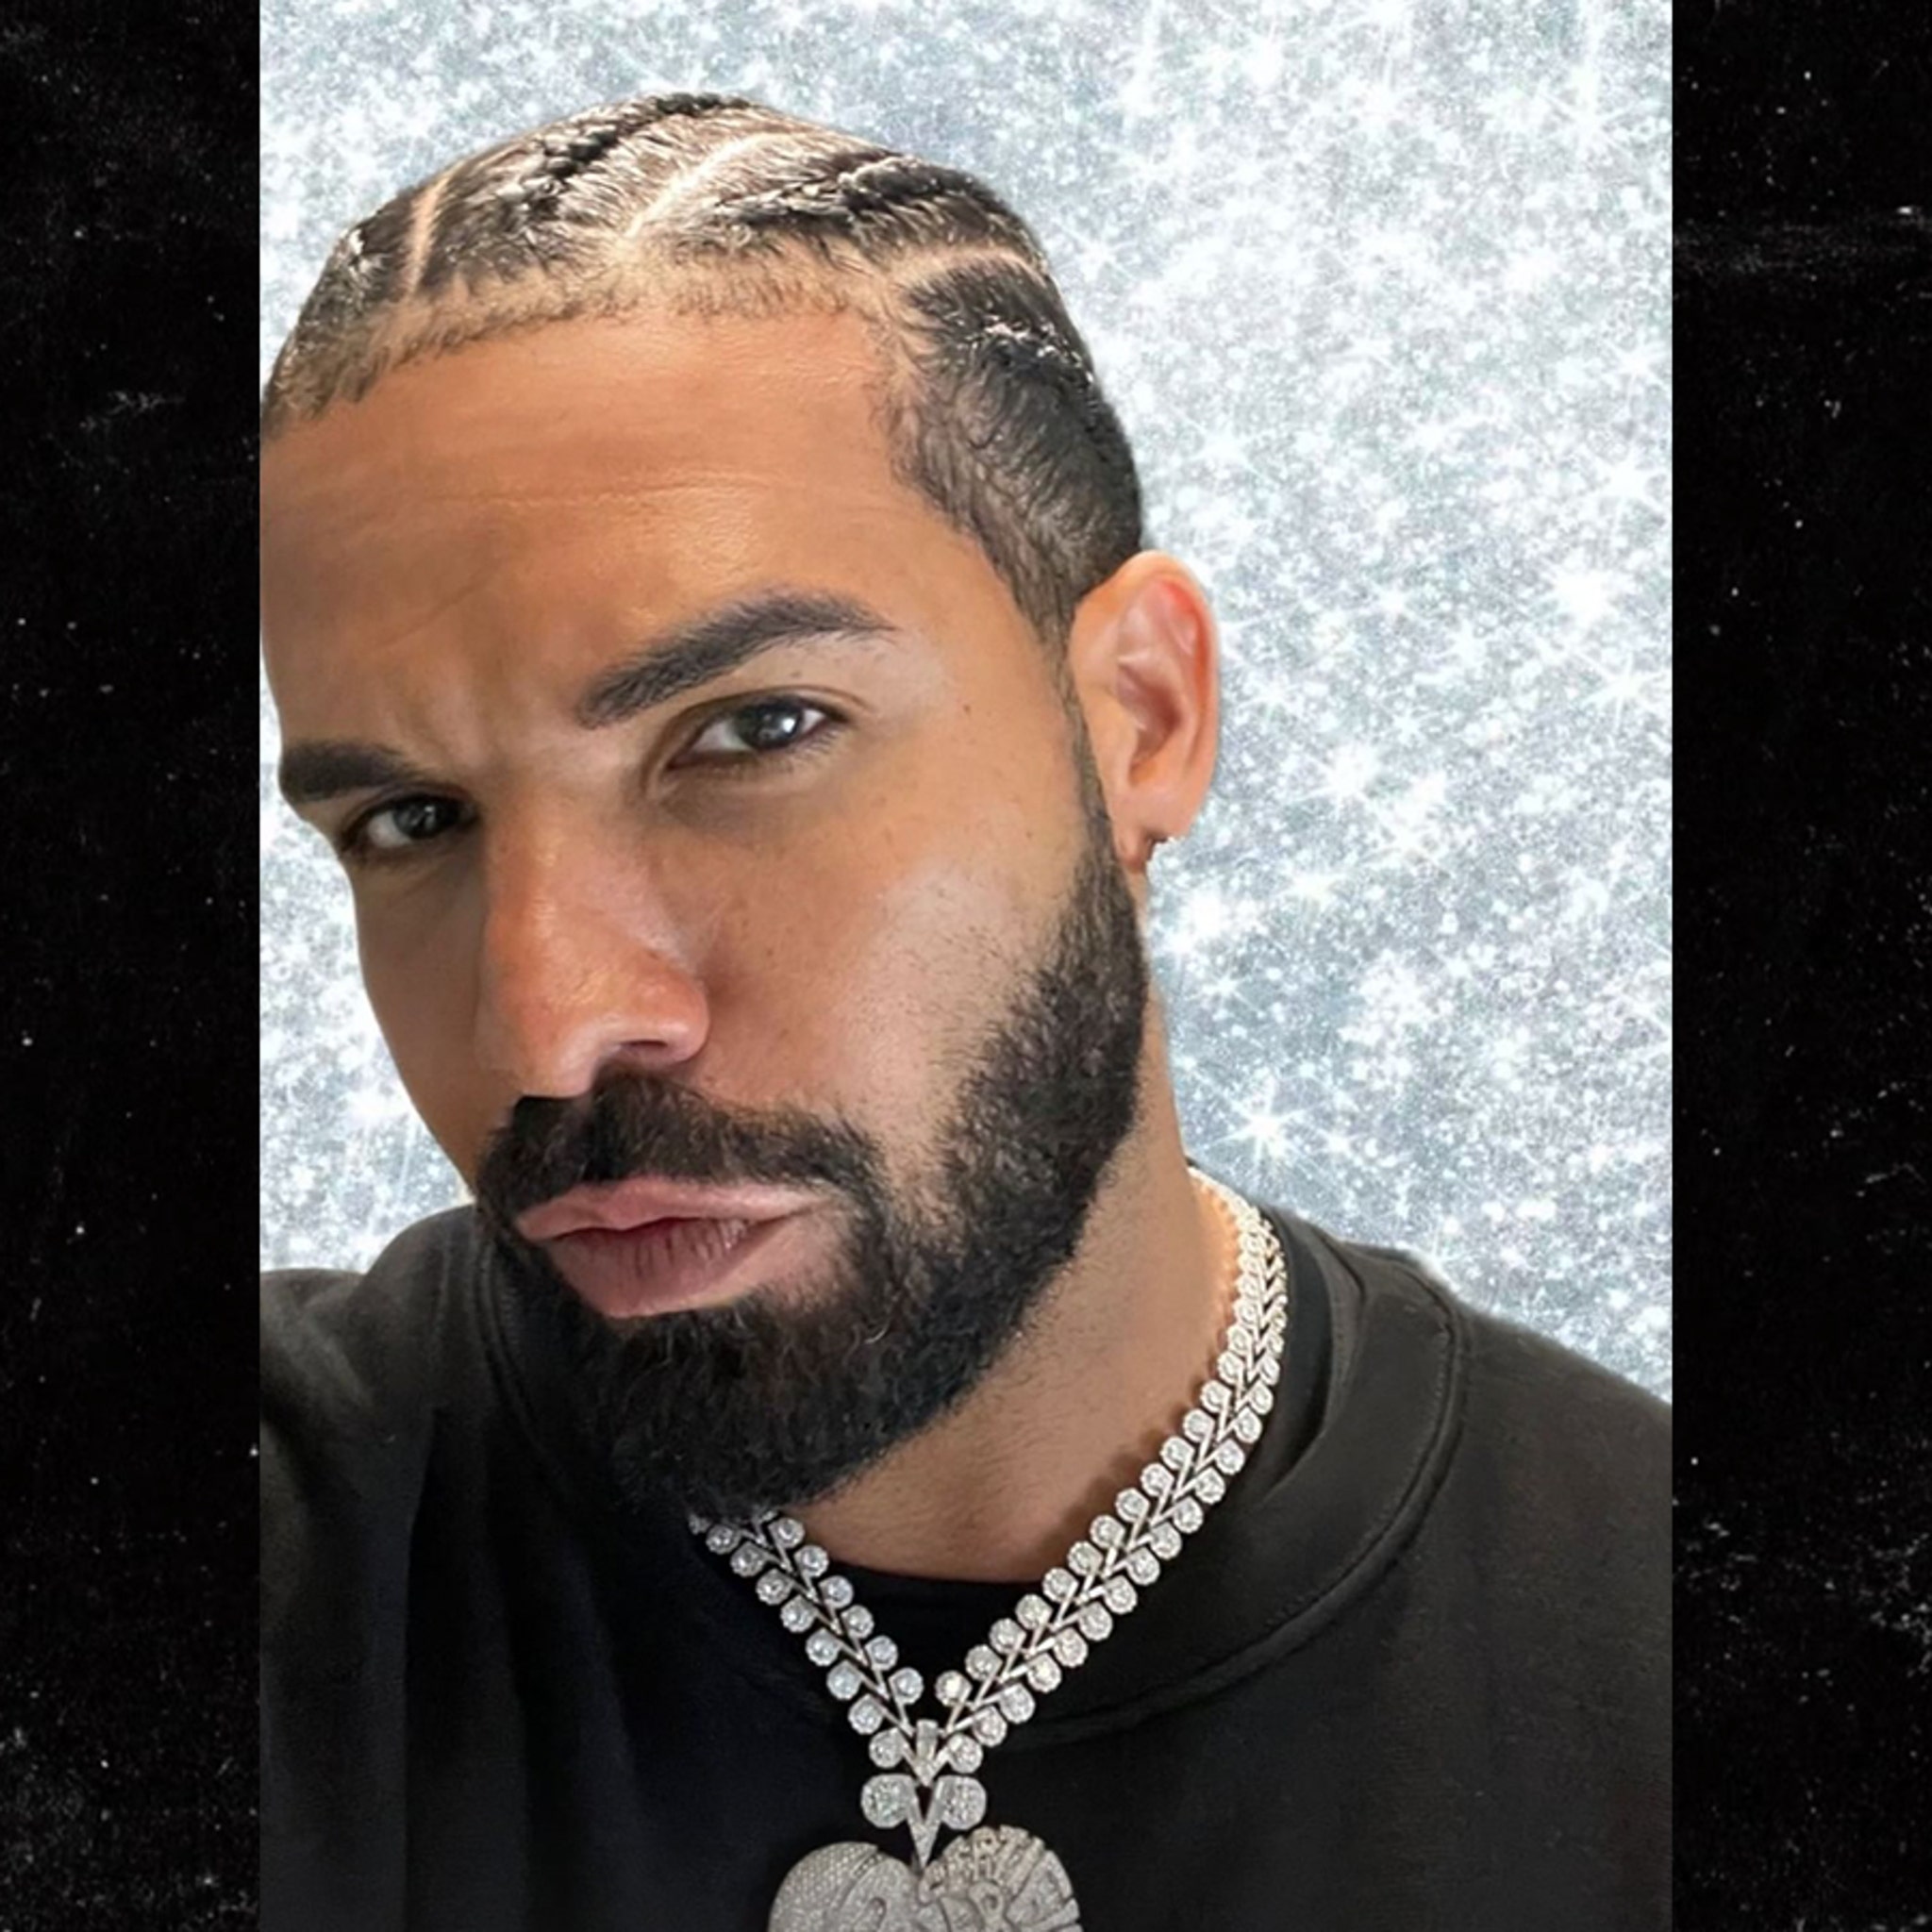 Drake Shows Off New Braided Hairstyle